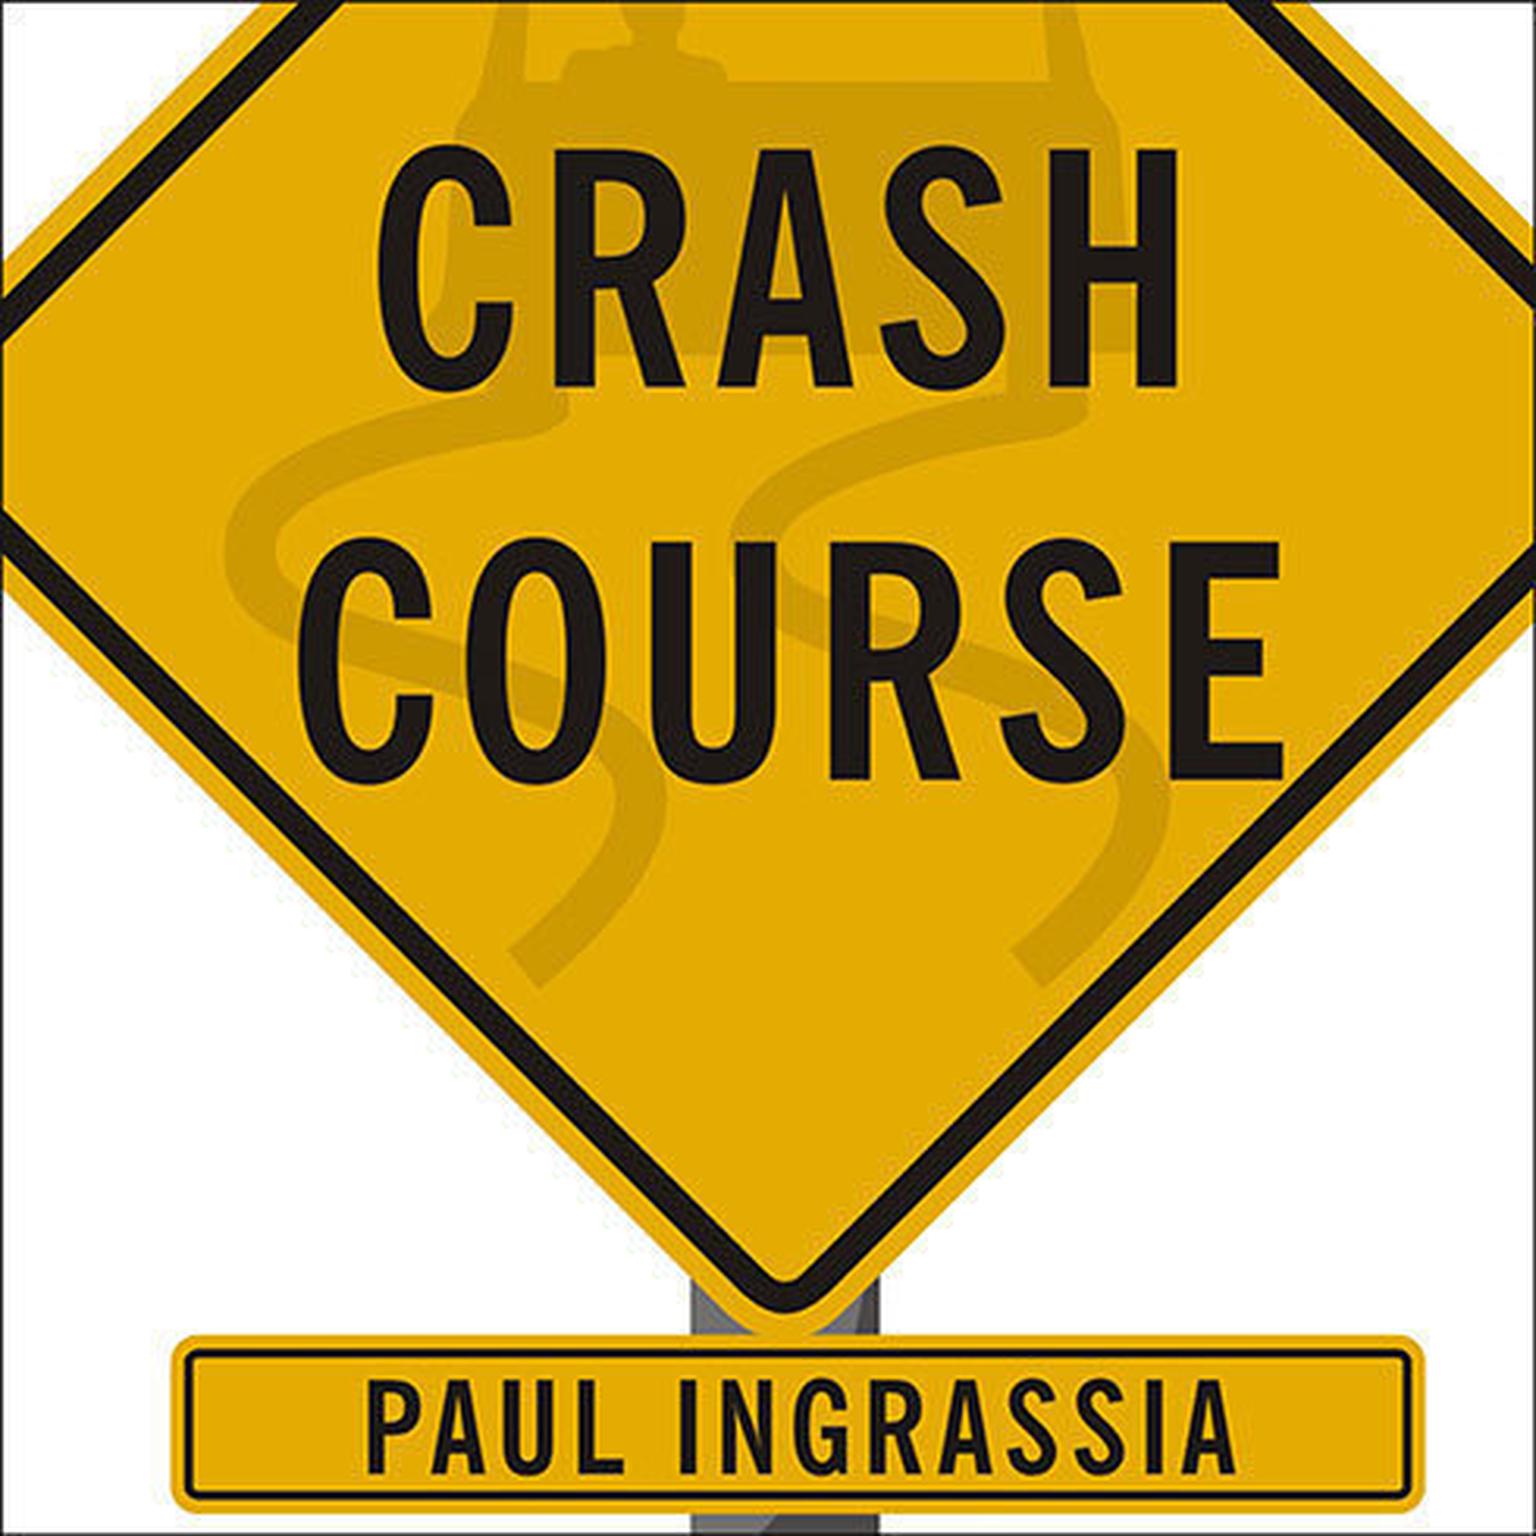 Crash Course: The American Automobile Industrys Road from Glory to Disaster Audiobook, by Paul Ingrassia